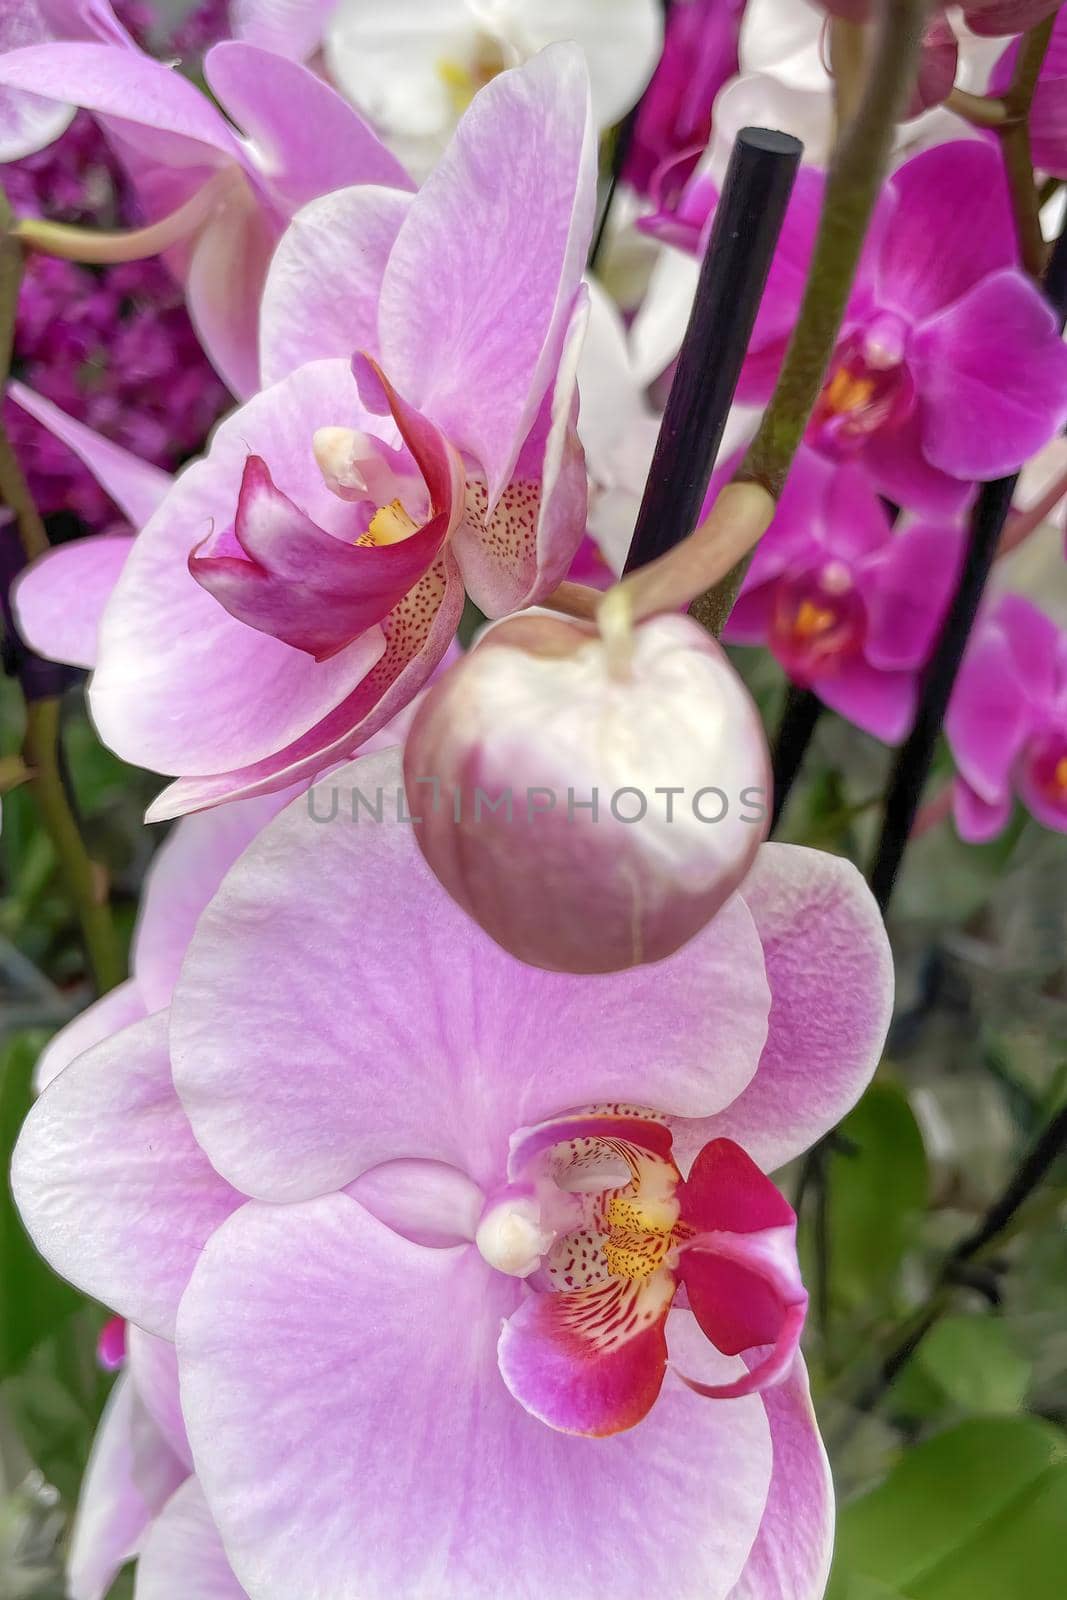 Orchidaceae commonly called the orchid family, is a diverse and widespread family of flowering plants, with blooms that are often colourful and fragrant.